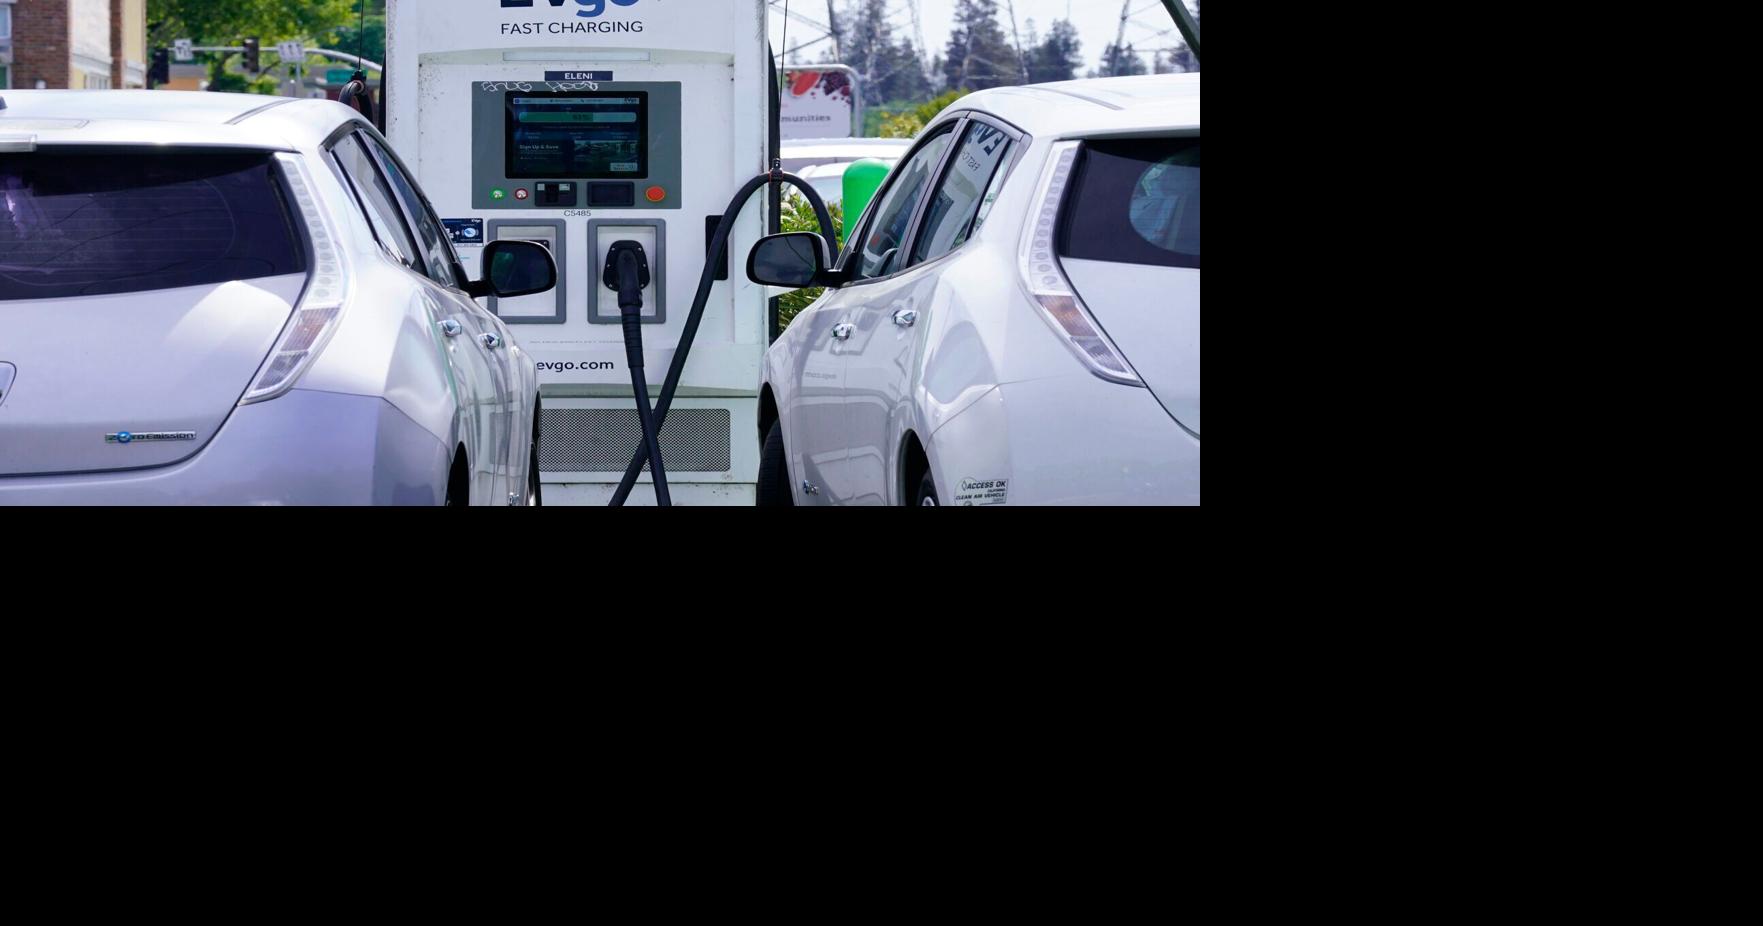 North Dakota getting more money, flexibility for electric vehicle charging stations